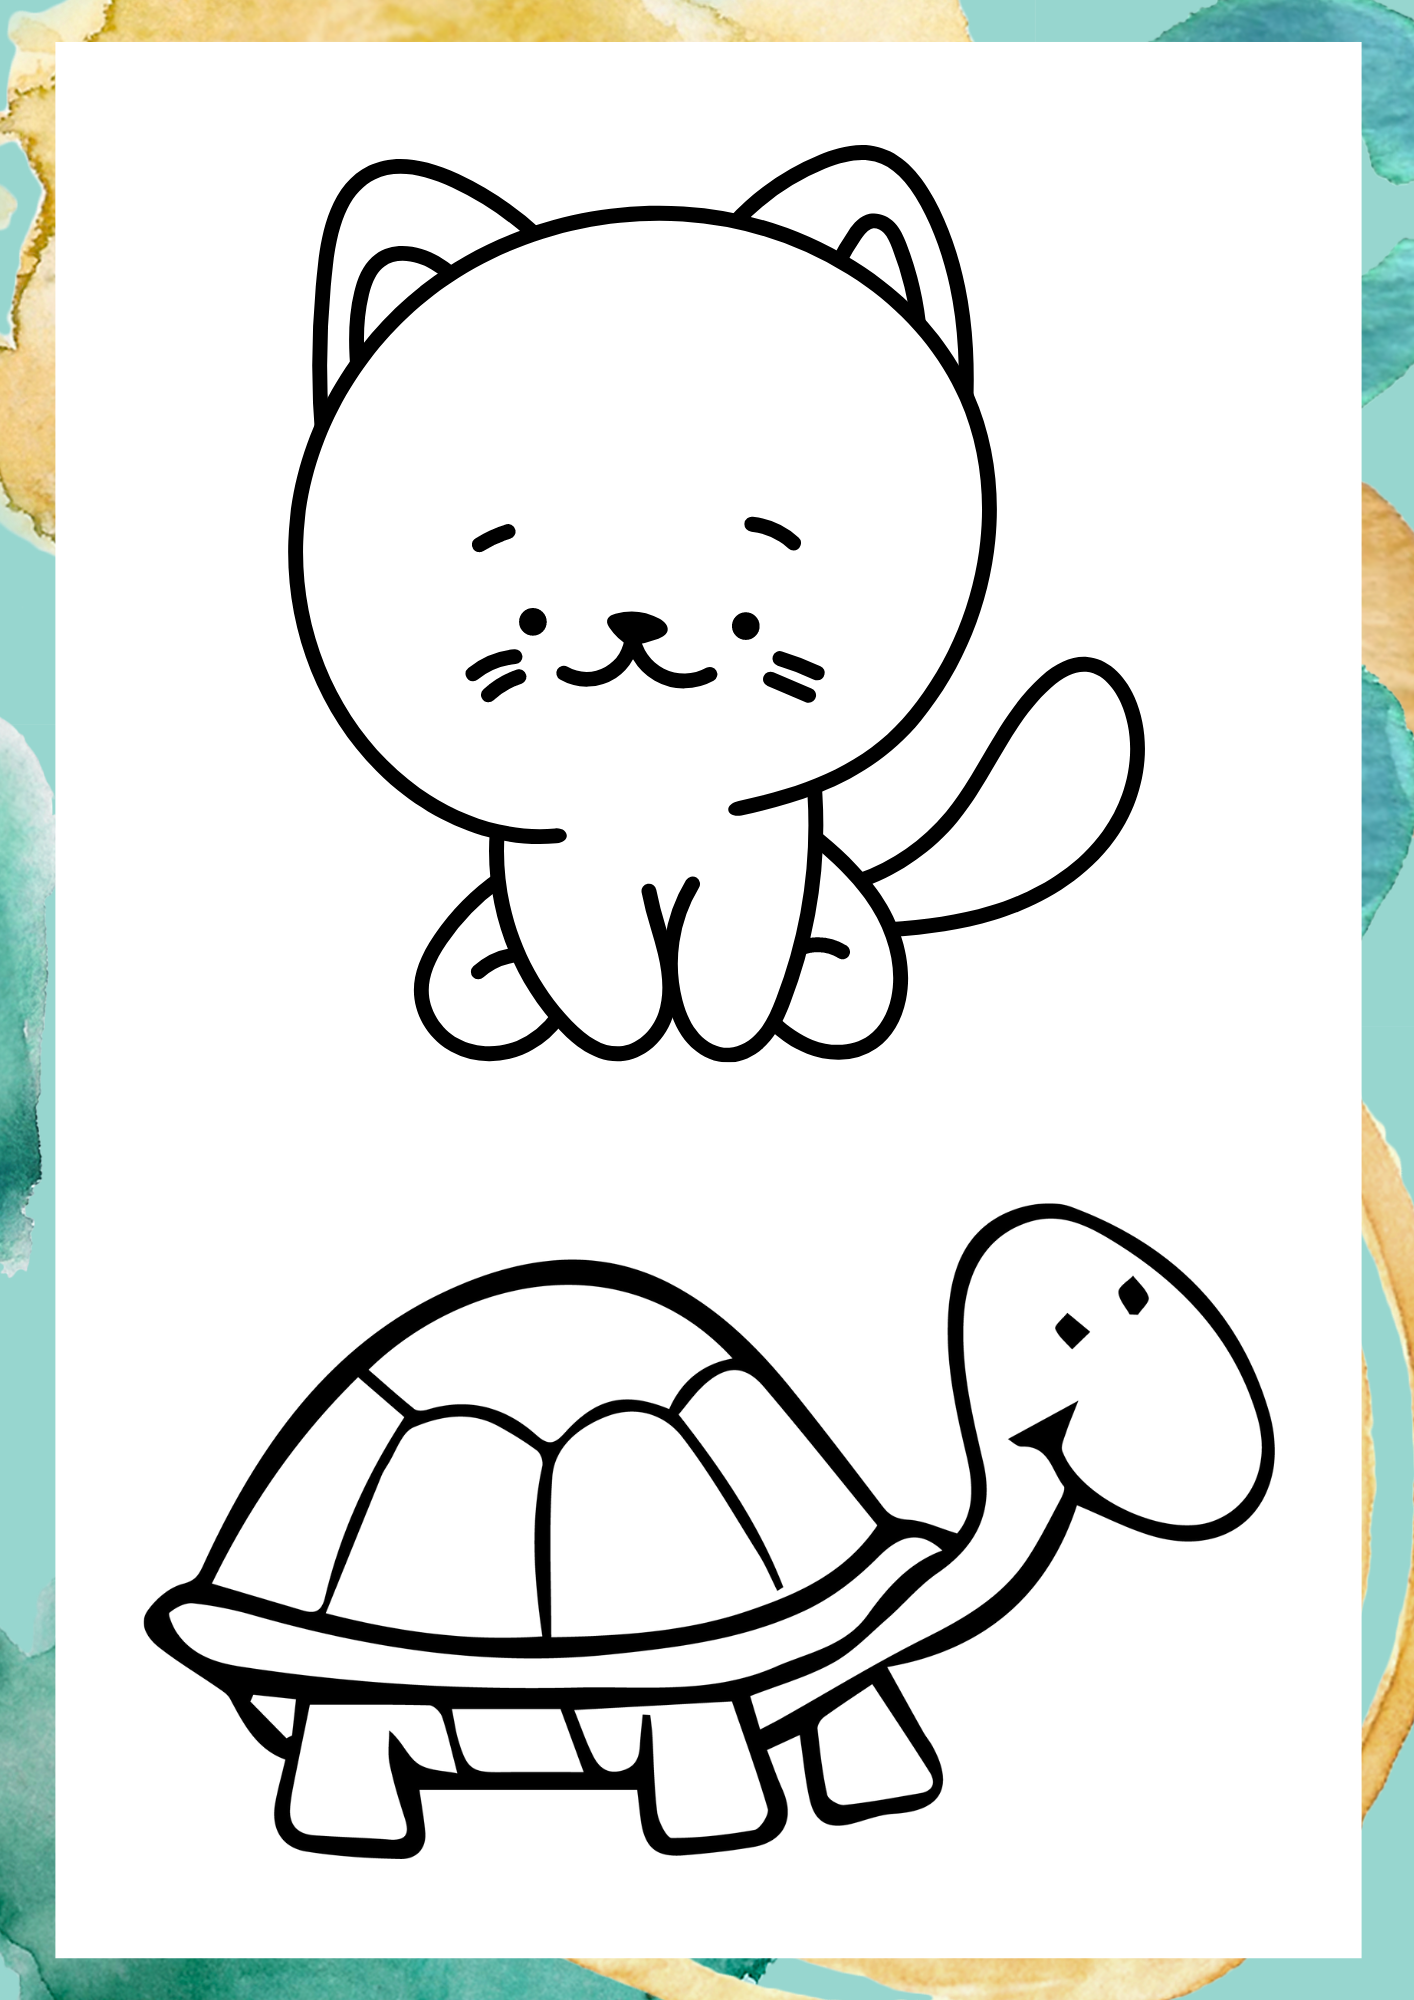 cat coloring page, animal coloring page, tortoise coloring page, coloring page, Coloring Page, coloring sheet, happy color, colouring, free coloring pages, coloring pages for kids, printable coloring pages, cute coloring pages, colouring pages, colouring to print, free printable coloring pages, free coloring pages for kids, easy coloring pages, coloring sheets coloring page for toddlers